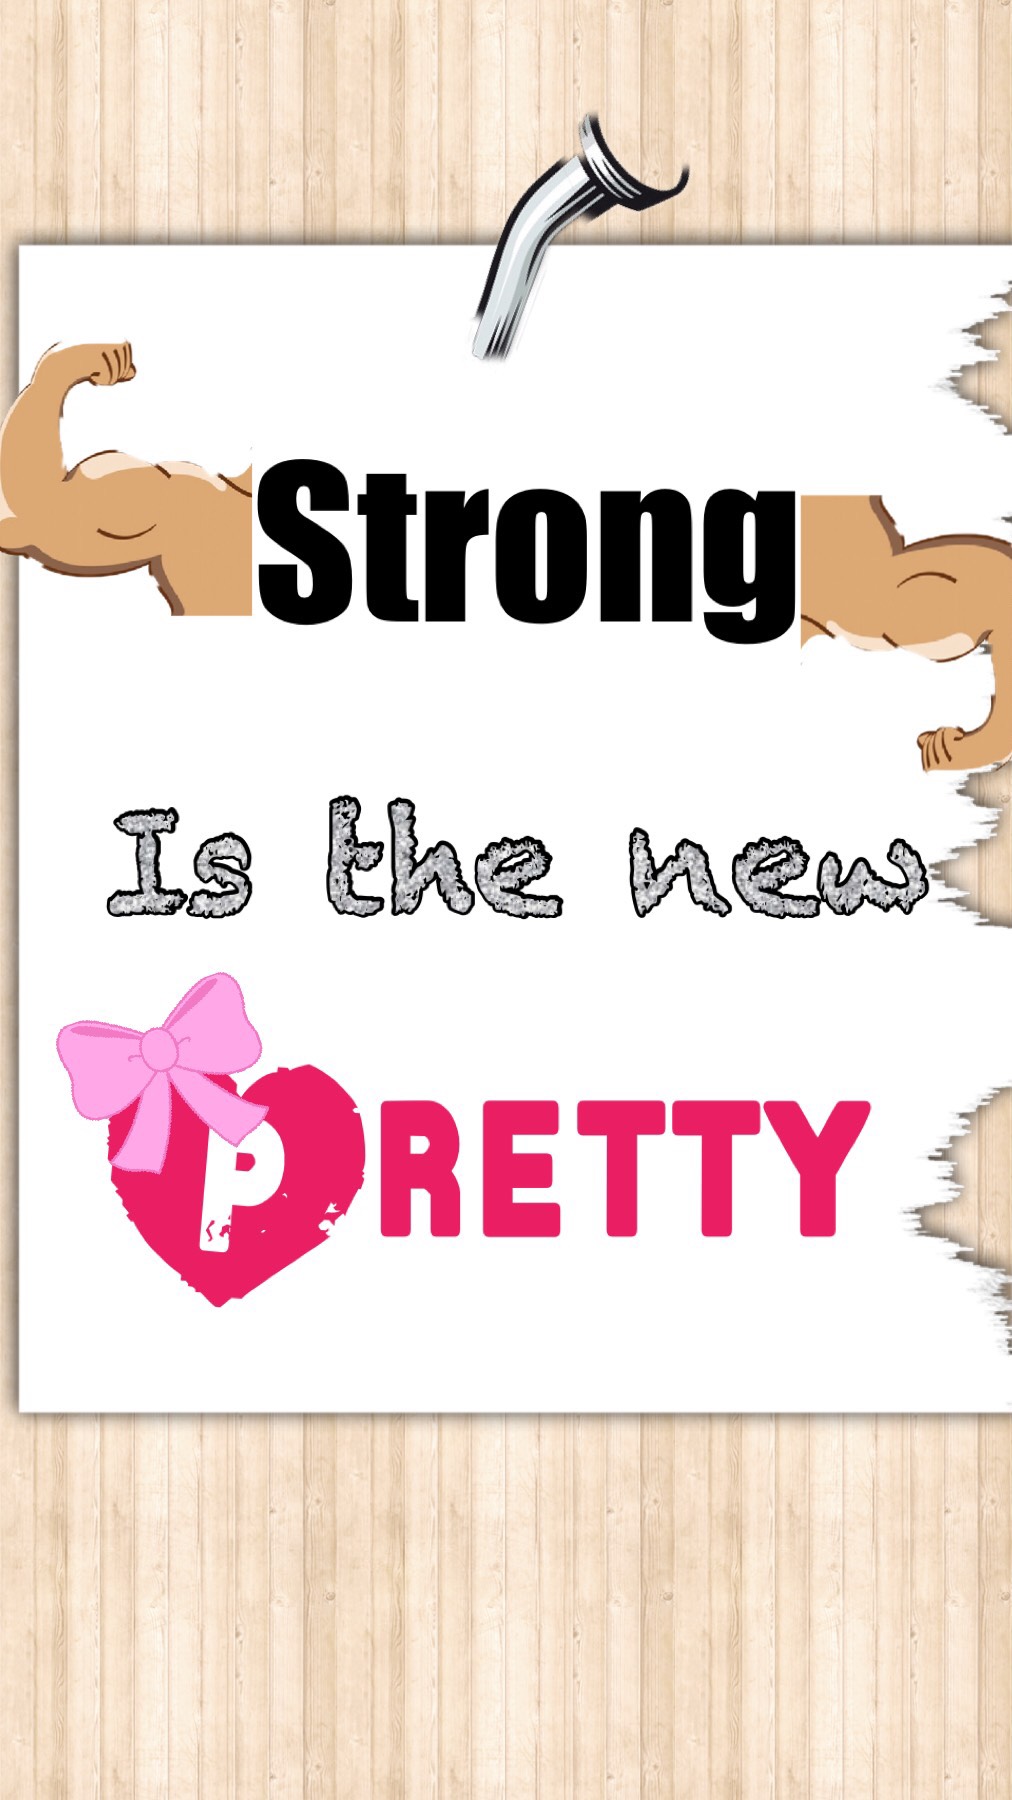 Strong is the new pretty. 👍🎗🎉🎉